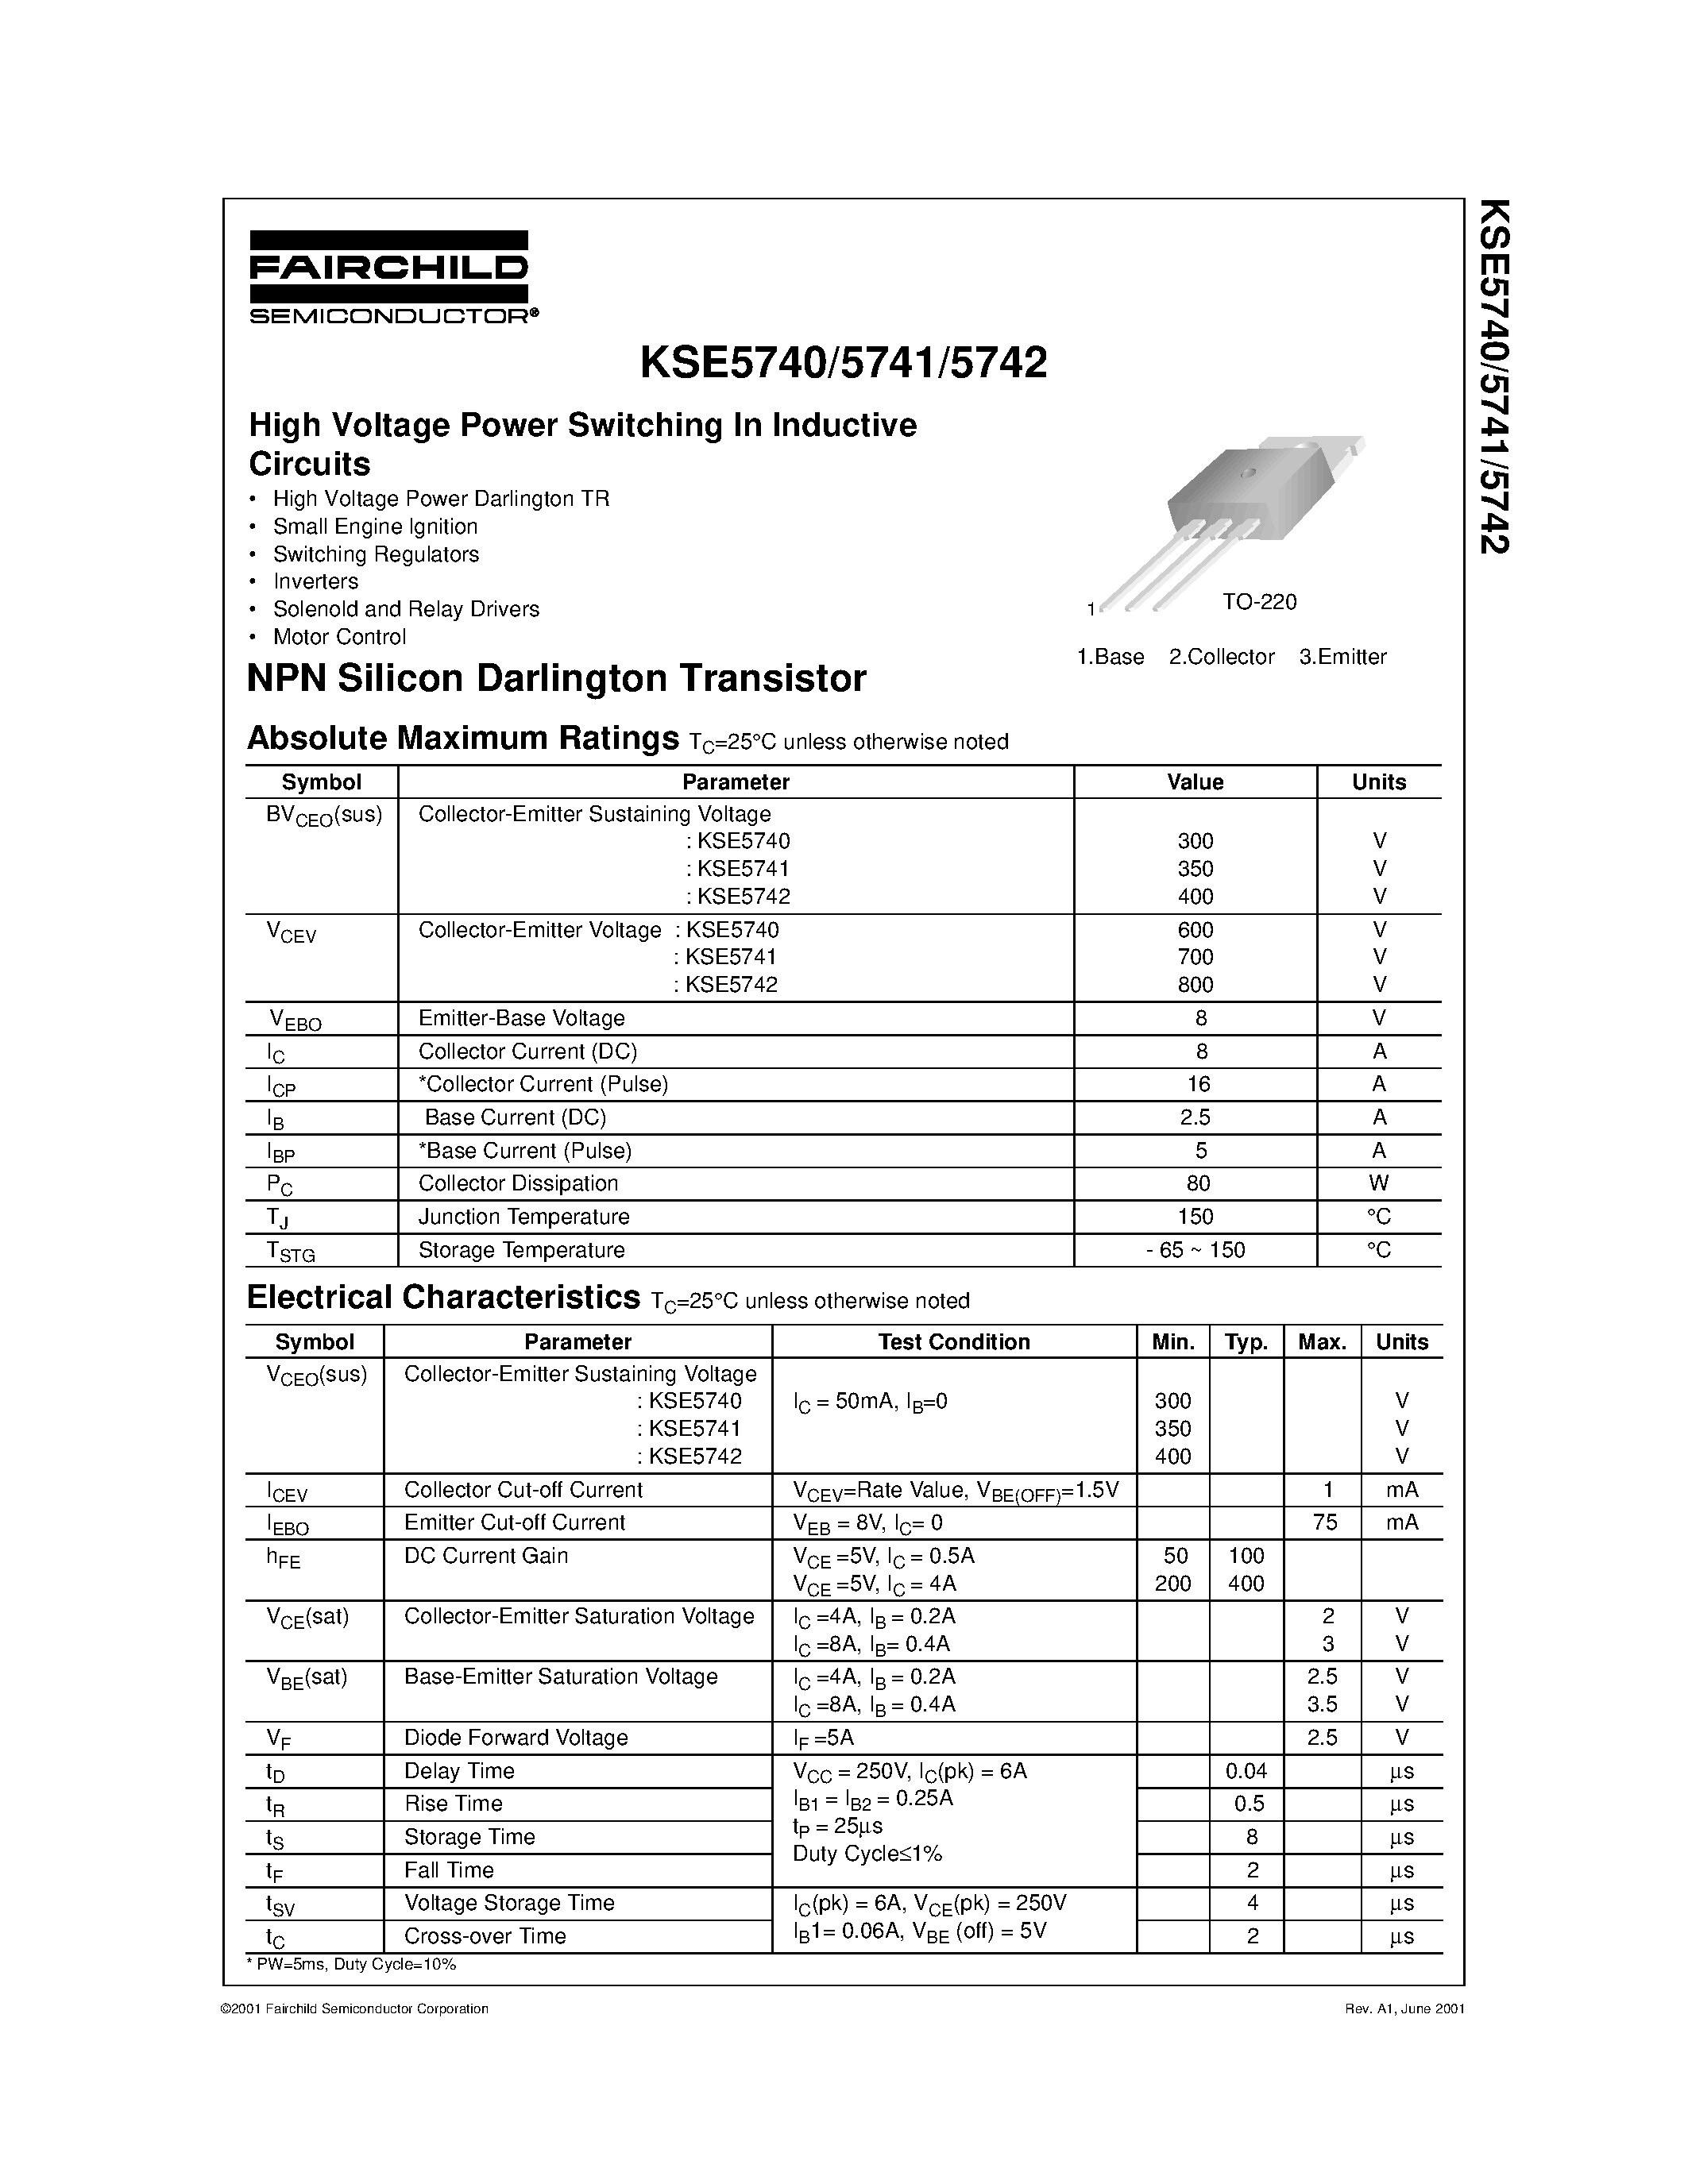 Datasheet KSE5741 - High Voltage Power Switching In Inductive Circuits page 1